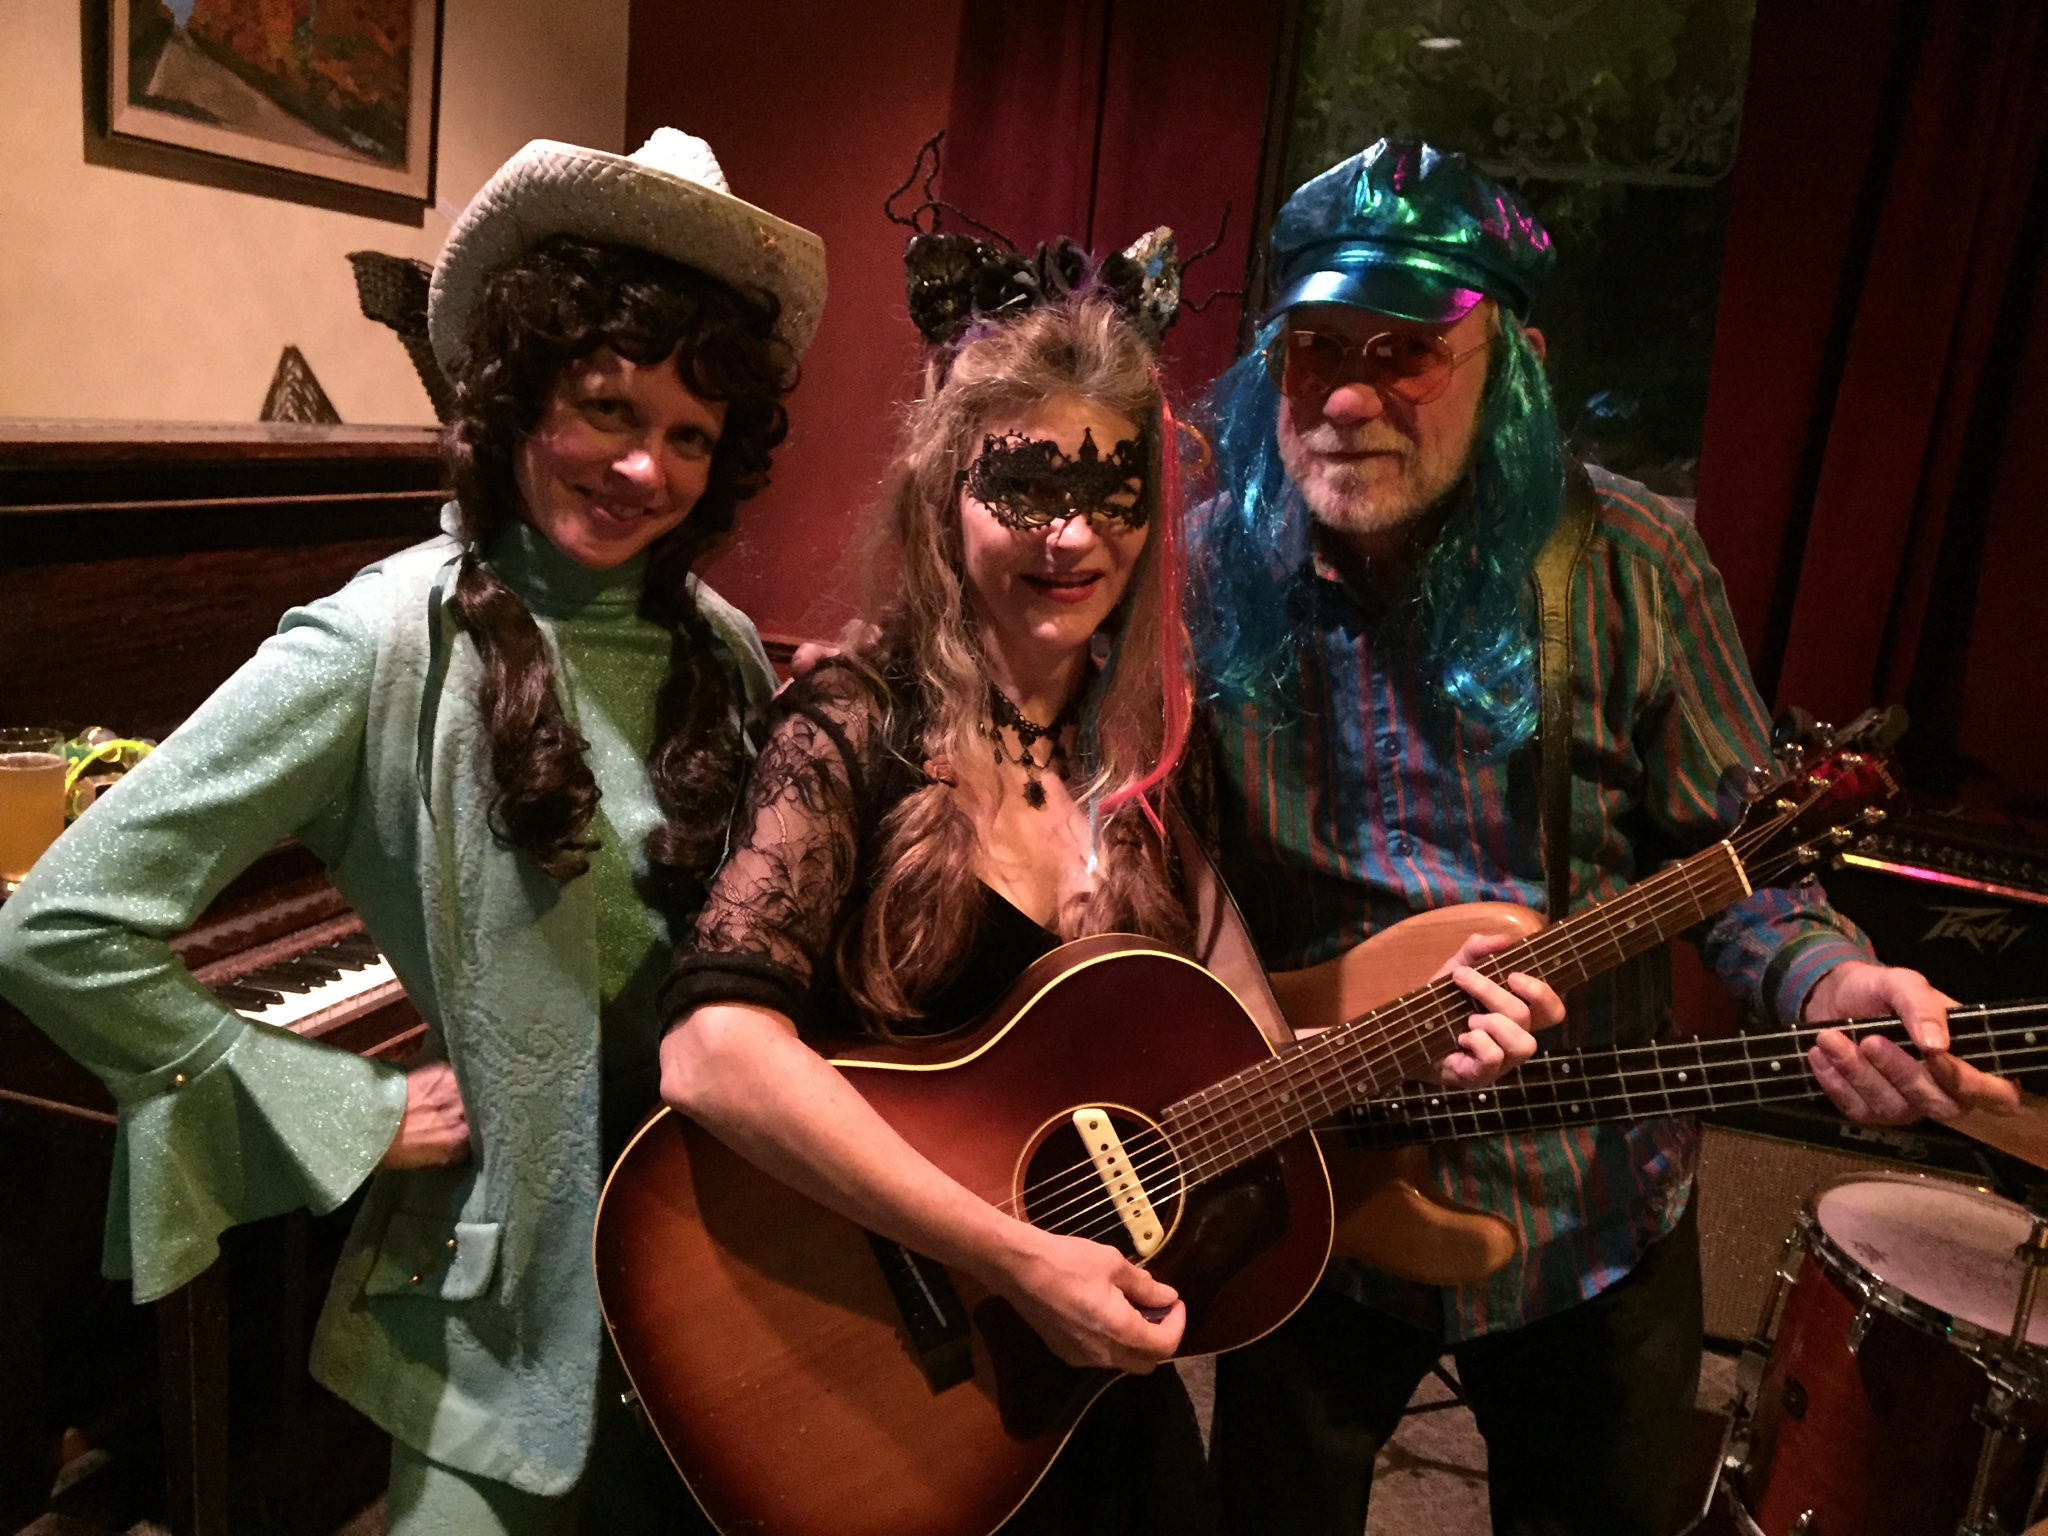  Halloween fun with two of my favorite rock stars Lorretta Lynn's lost sister Rebecca Campbell and the Blue Rocker Steve Switzer 